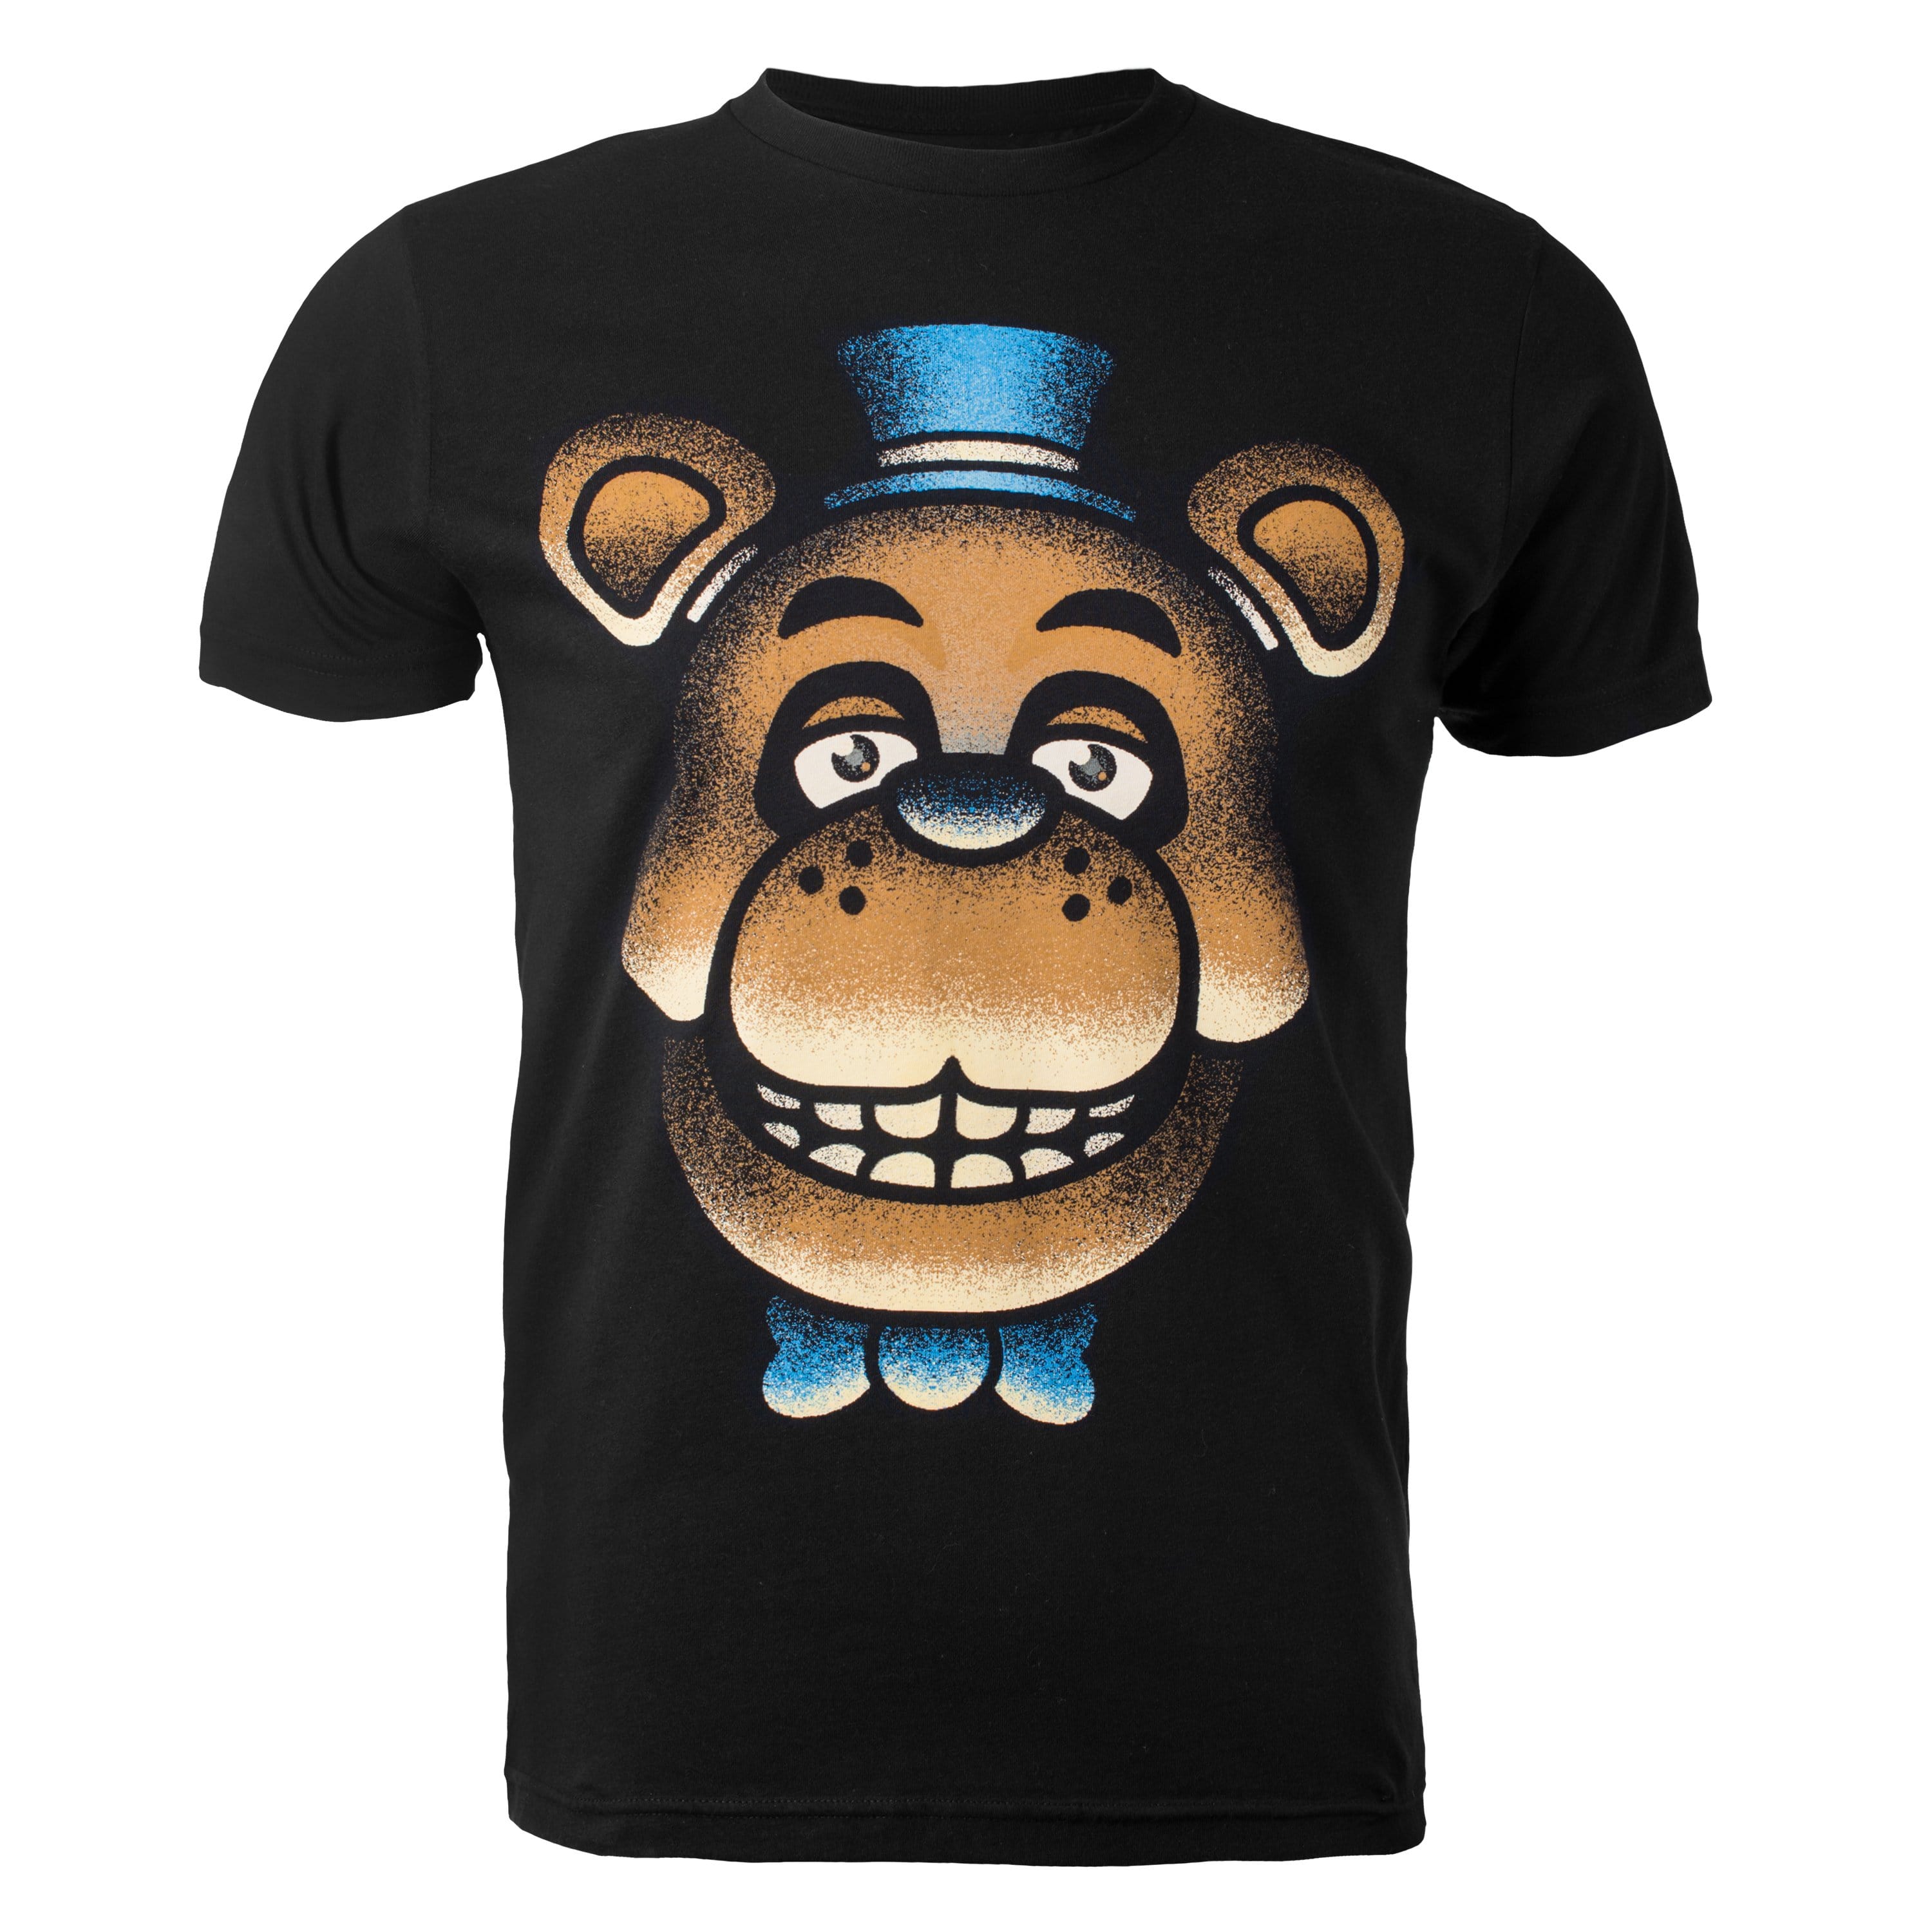 Five Nights at Freddy's - Glow-in-the-Dark Lights Out Freddy Tee